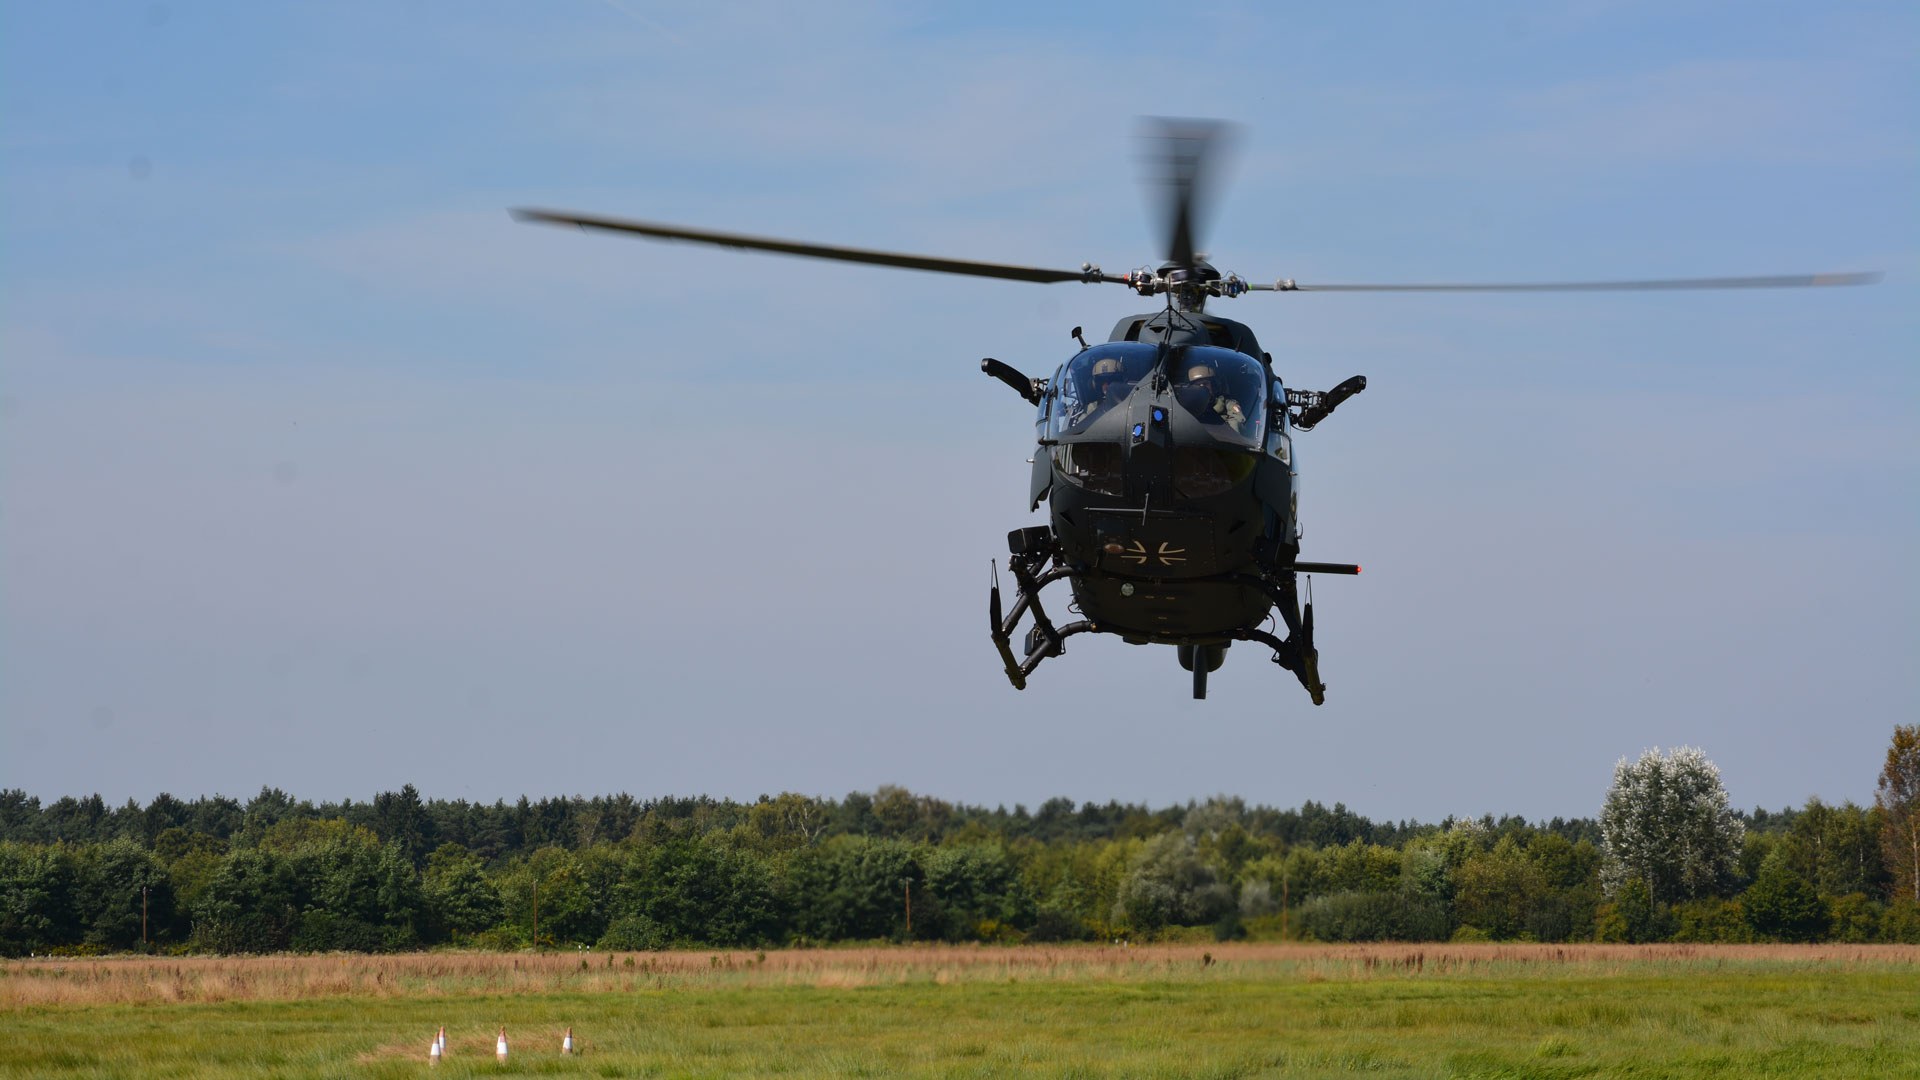 H145M helicopter during research